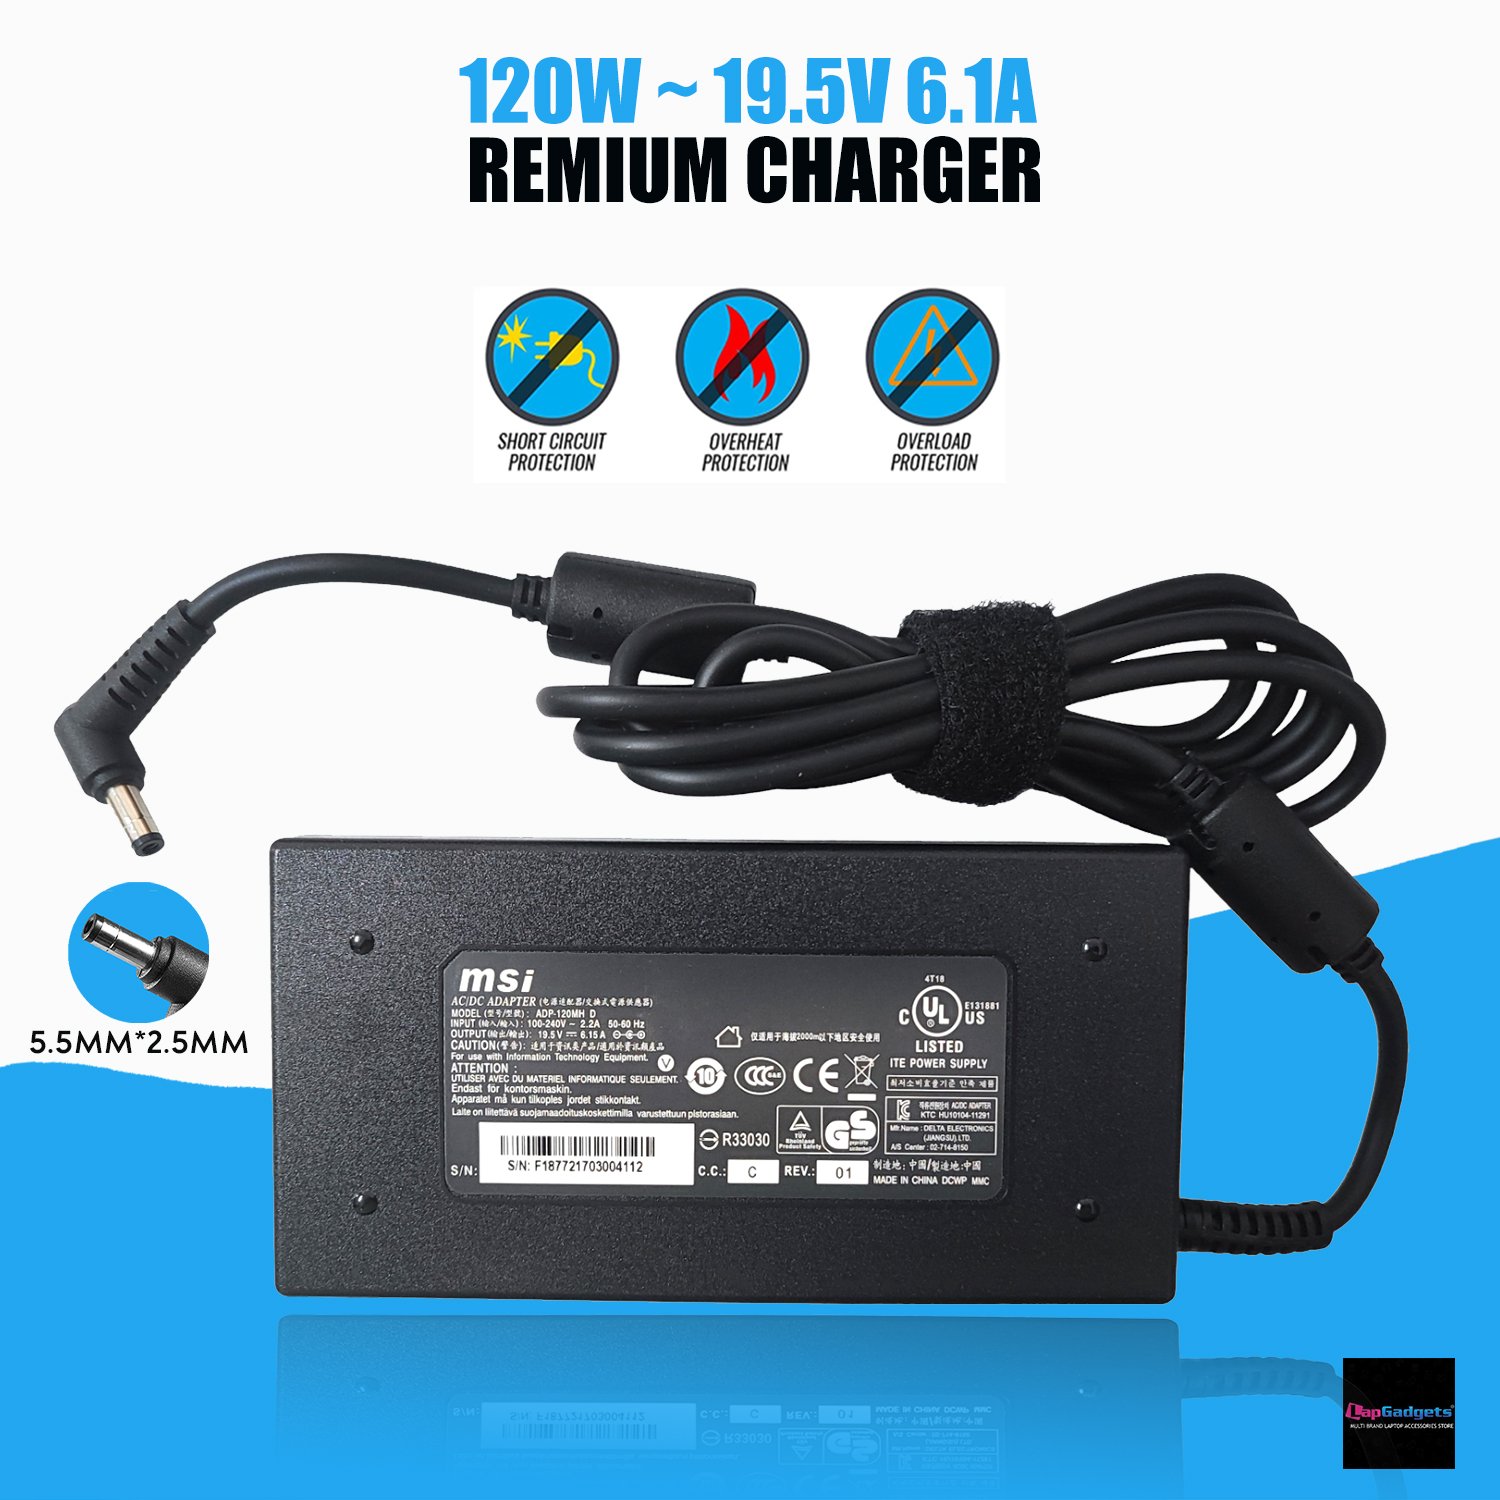 msi-120w-charger- 5.5mm